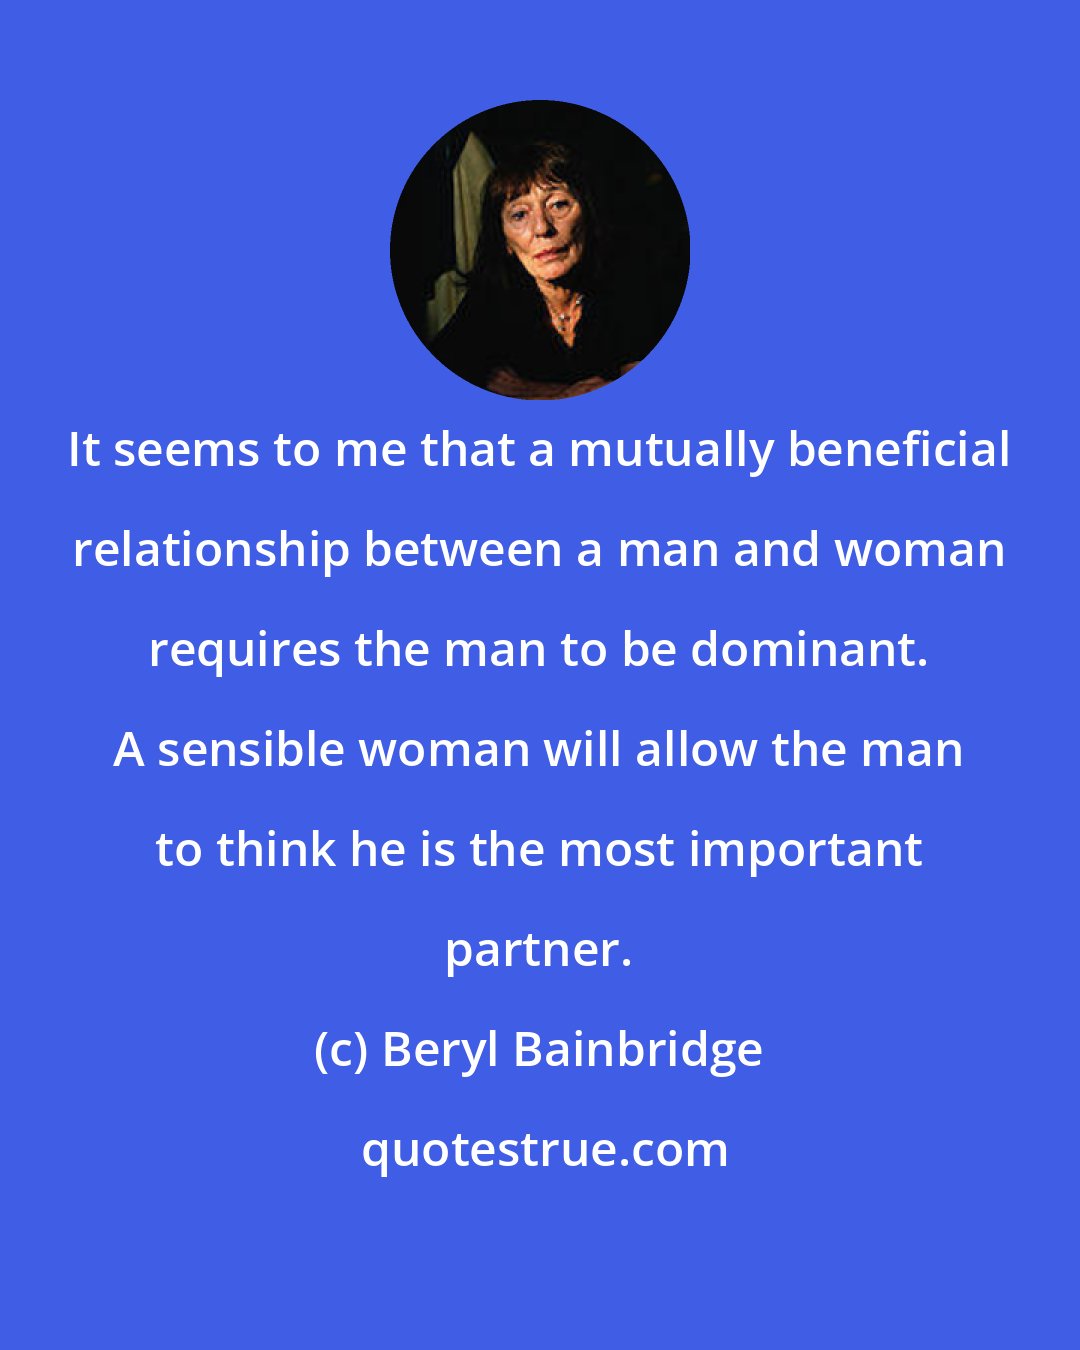 Beryl Bainbridge: It seems to me that a mutually beneficial relationship between a man and woman requires the man to be dominant. A sensible woman will allow the man to think he is the most important partner.